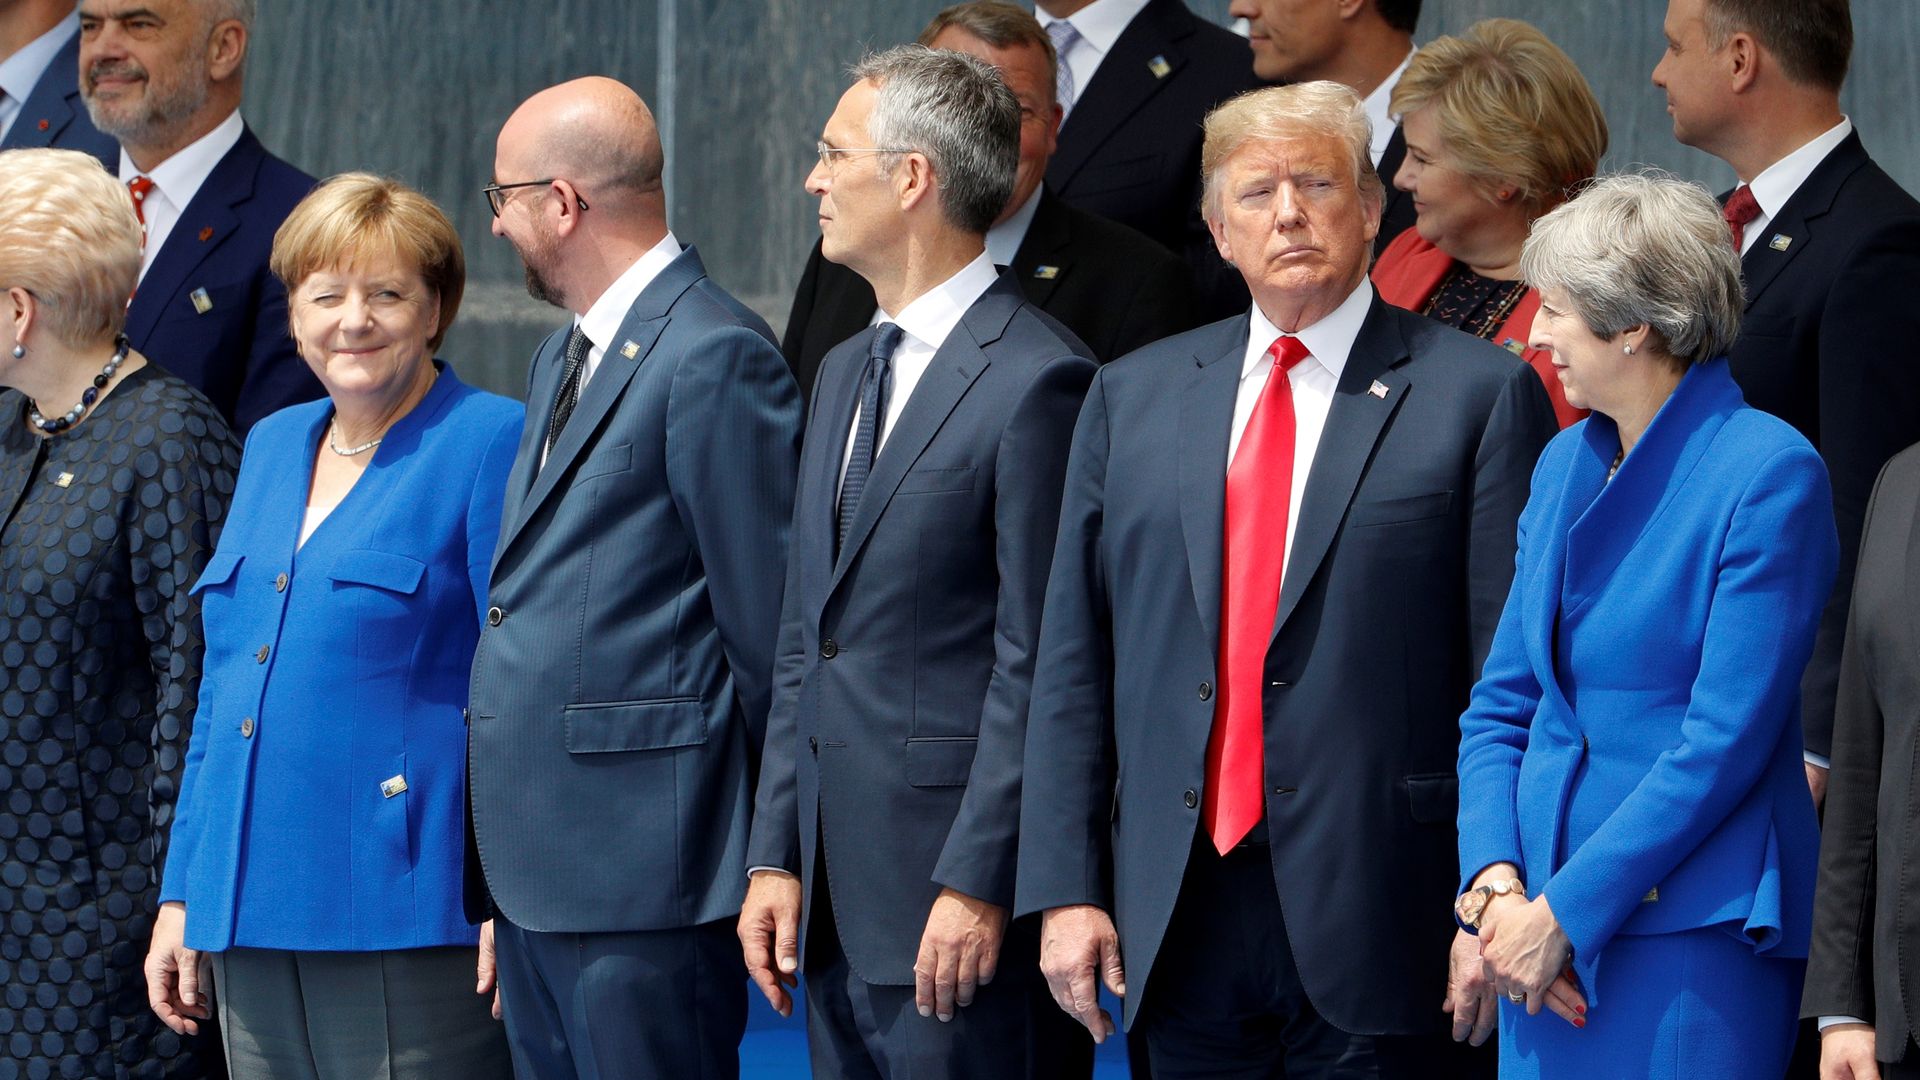 Trump stands in line with other NATO leaders